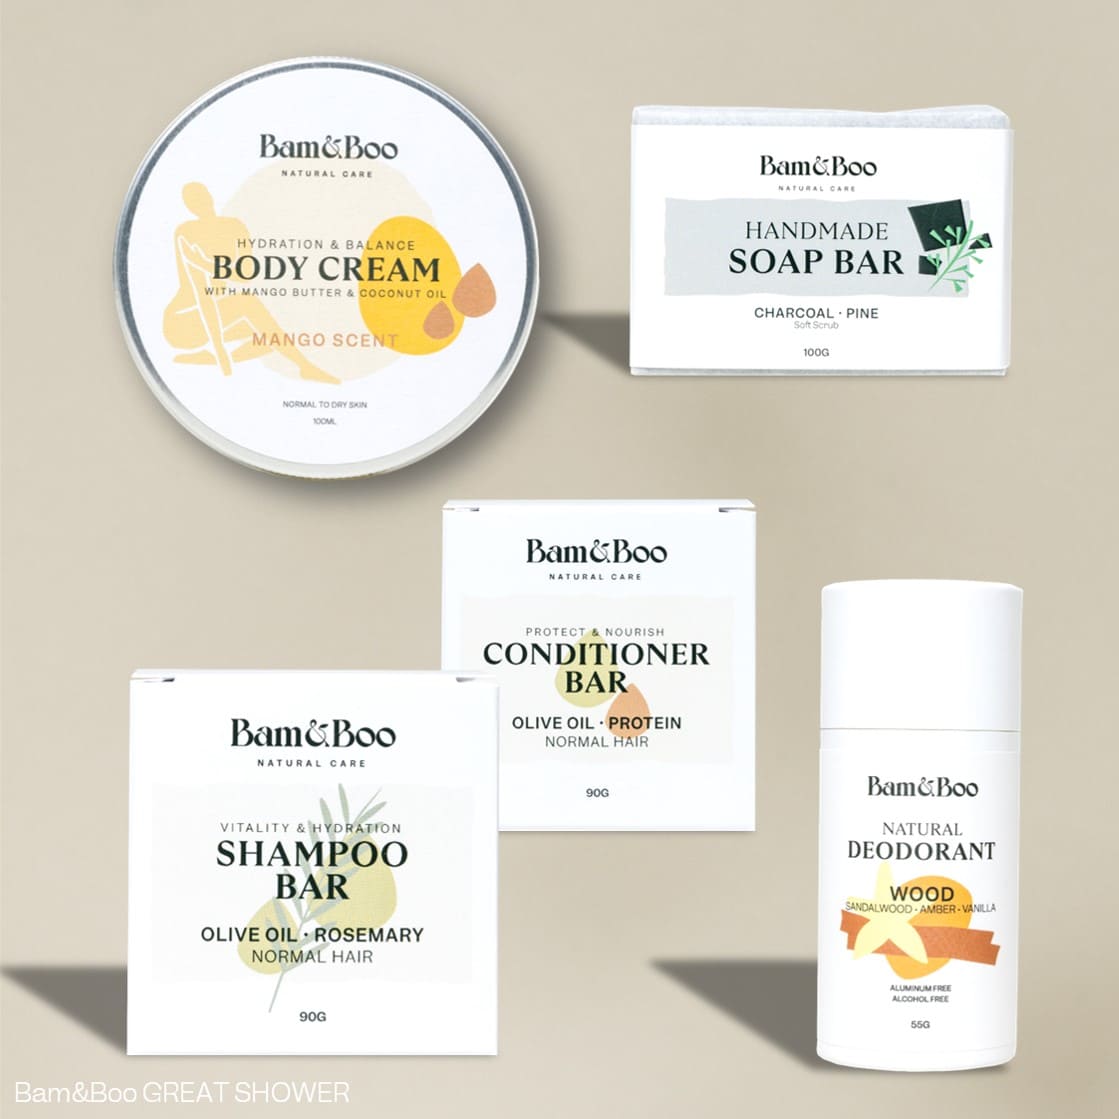 CHRISTMAS GIFT SET | Great Shower - Bam&amp;Boo - Eco-friendly, vegan, sustainable oral and personal care